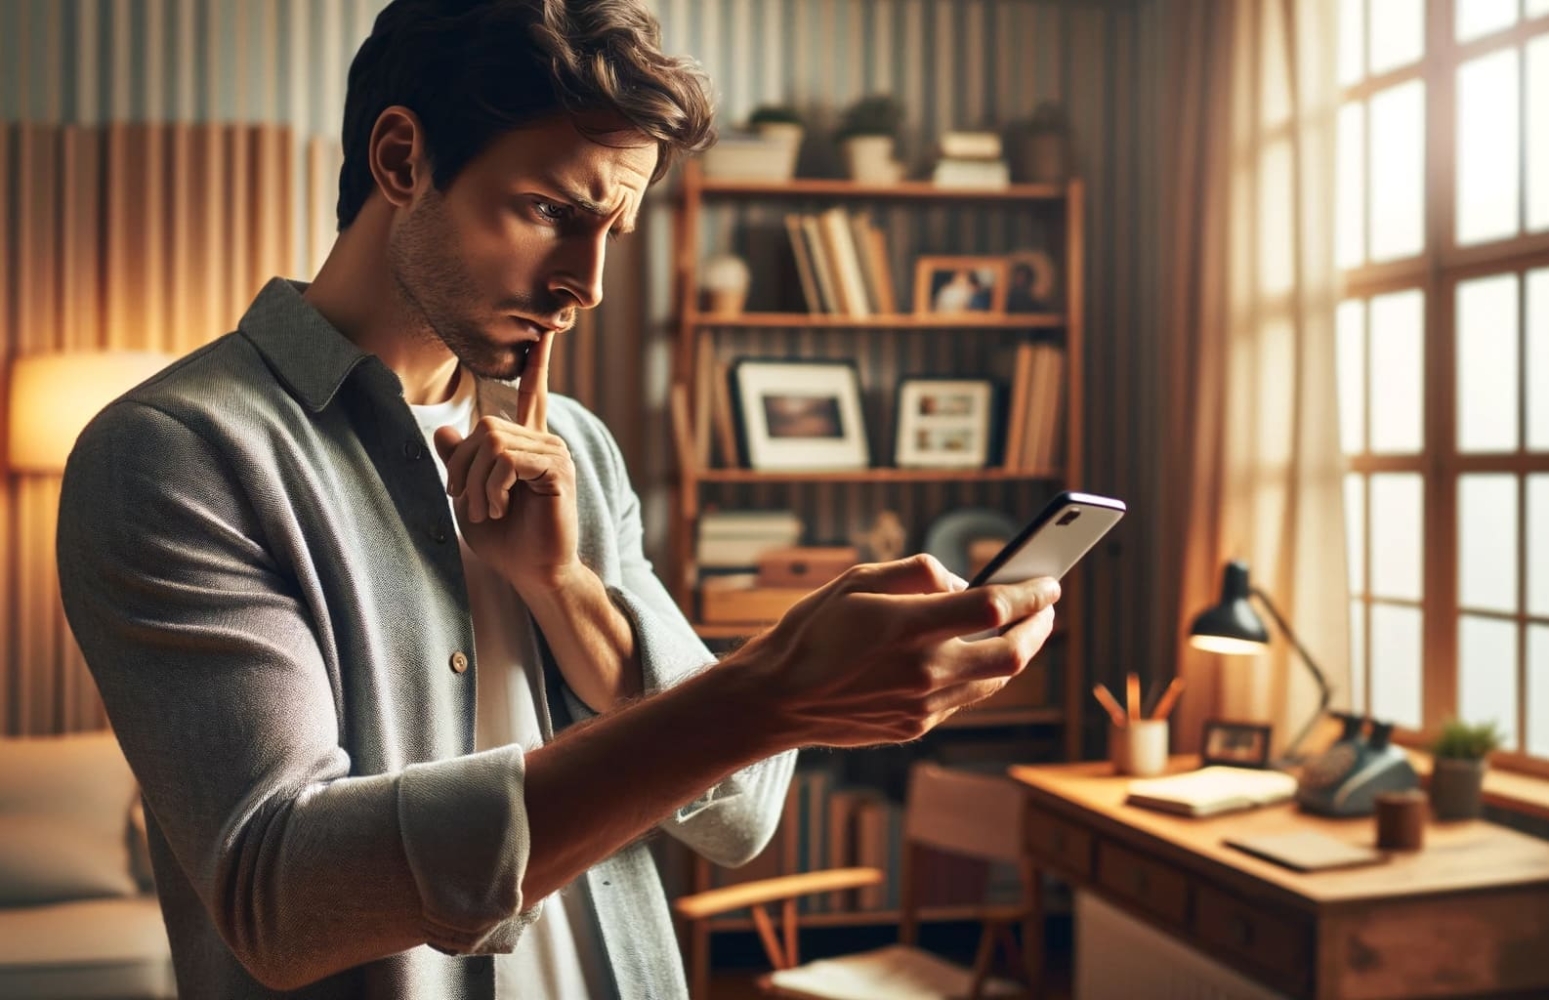 The image shows a man standing in a bright, cozy room with a neutral interior. His attention is completely absorbed by the smartphone he is holding in his hand. His gaze is tensely fixed on the screen, which displays an incoming call from an unknown number. Around the man are elements of everyday life: in the background is a table with a stack of books, a notebook and pens, and on a shelf are pictures of the family